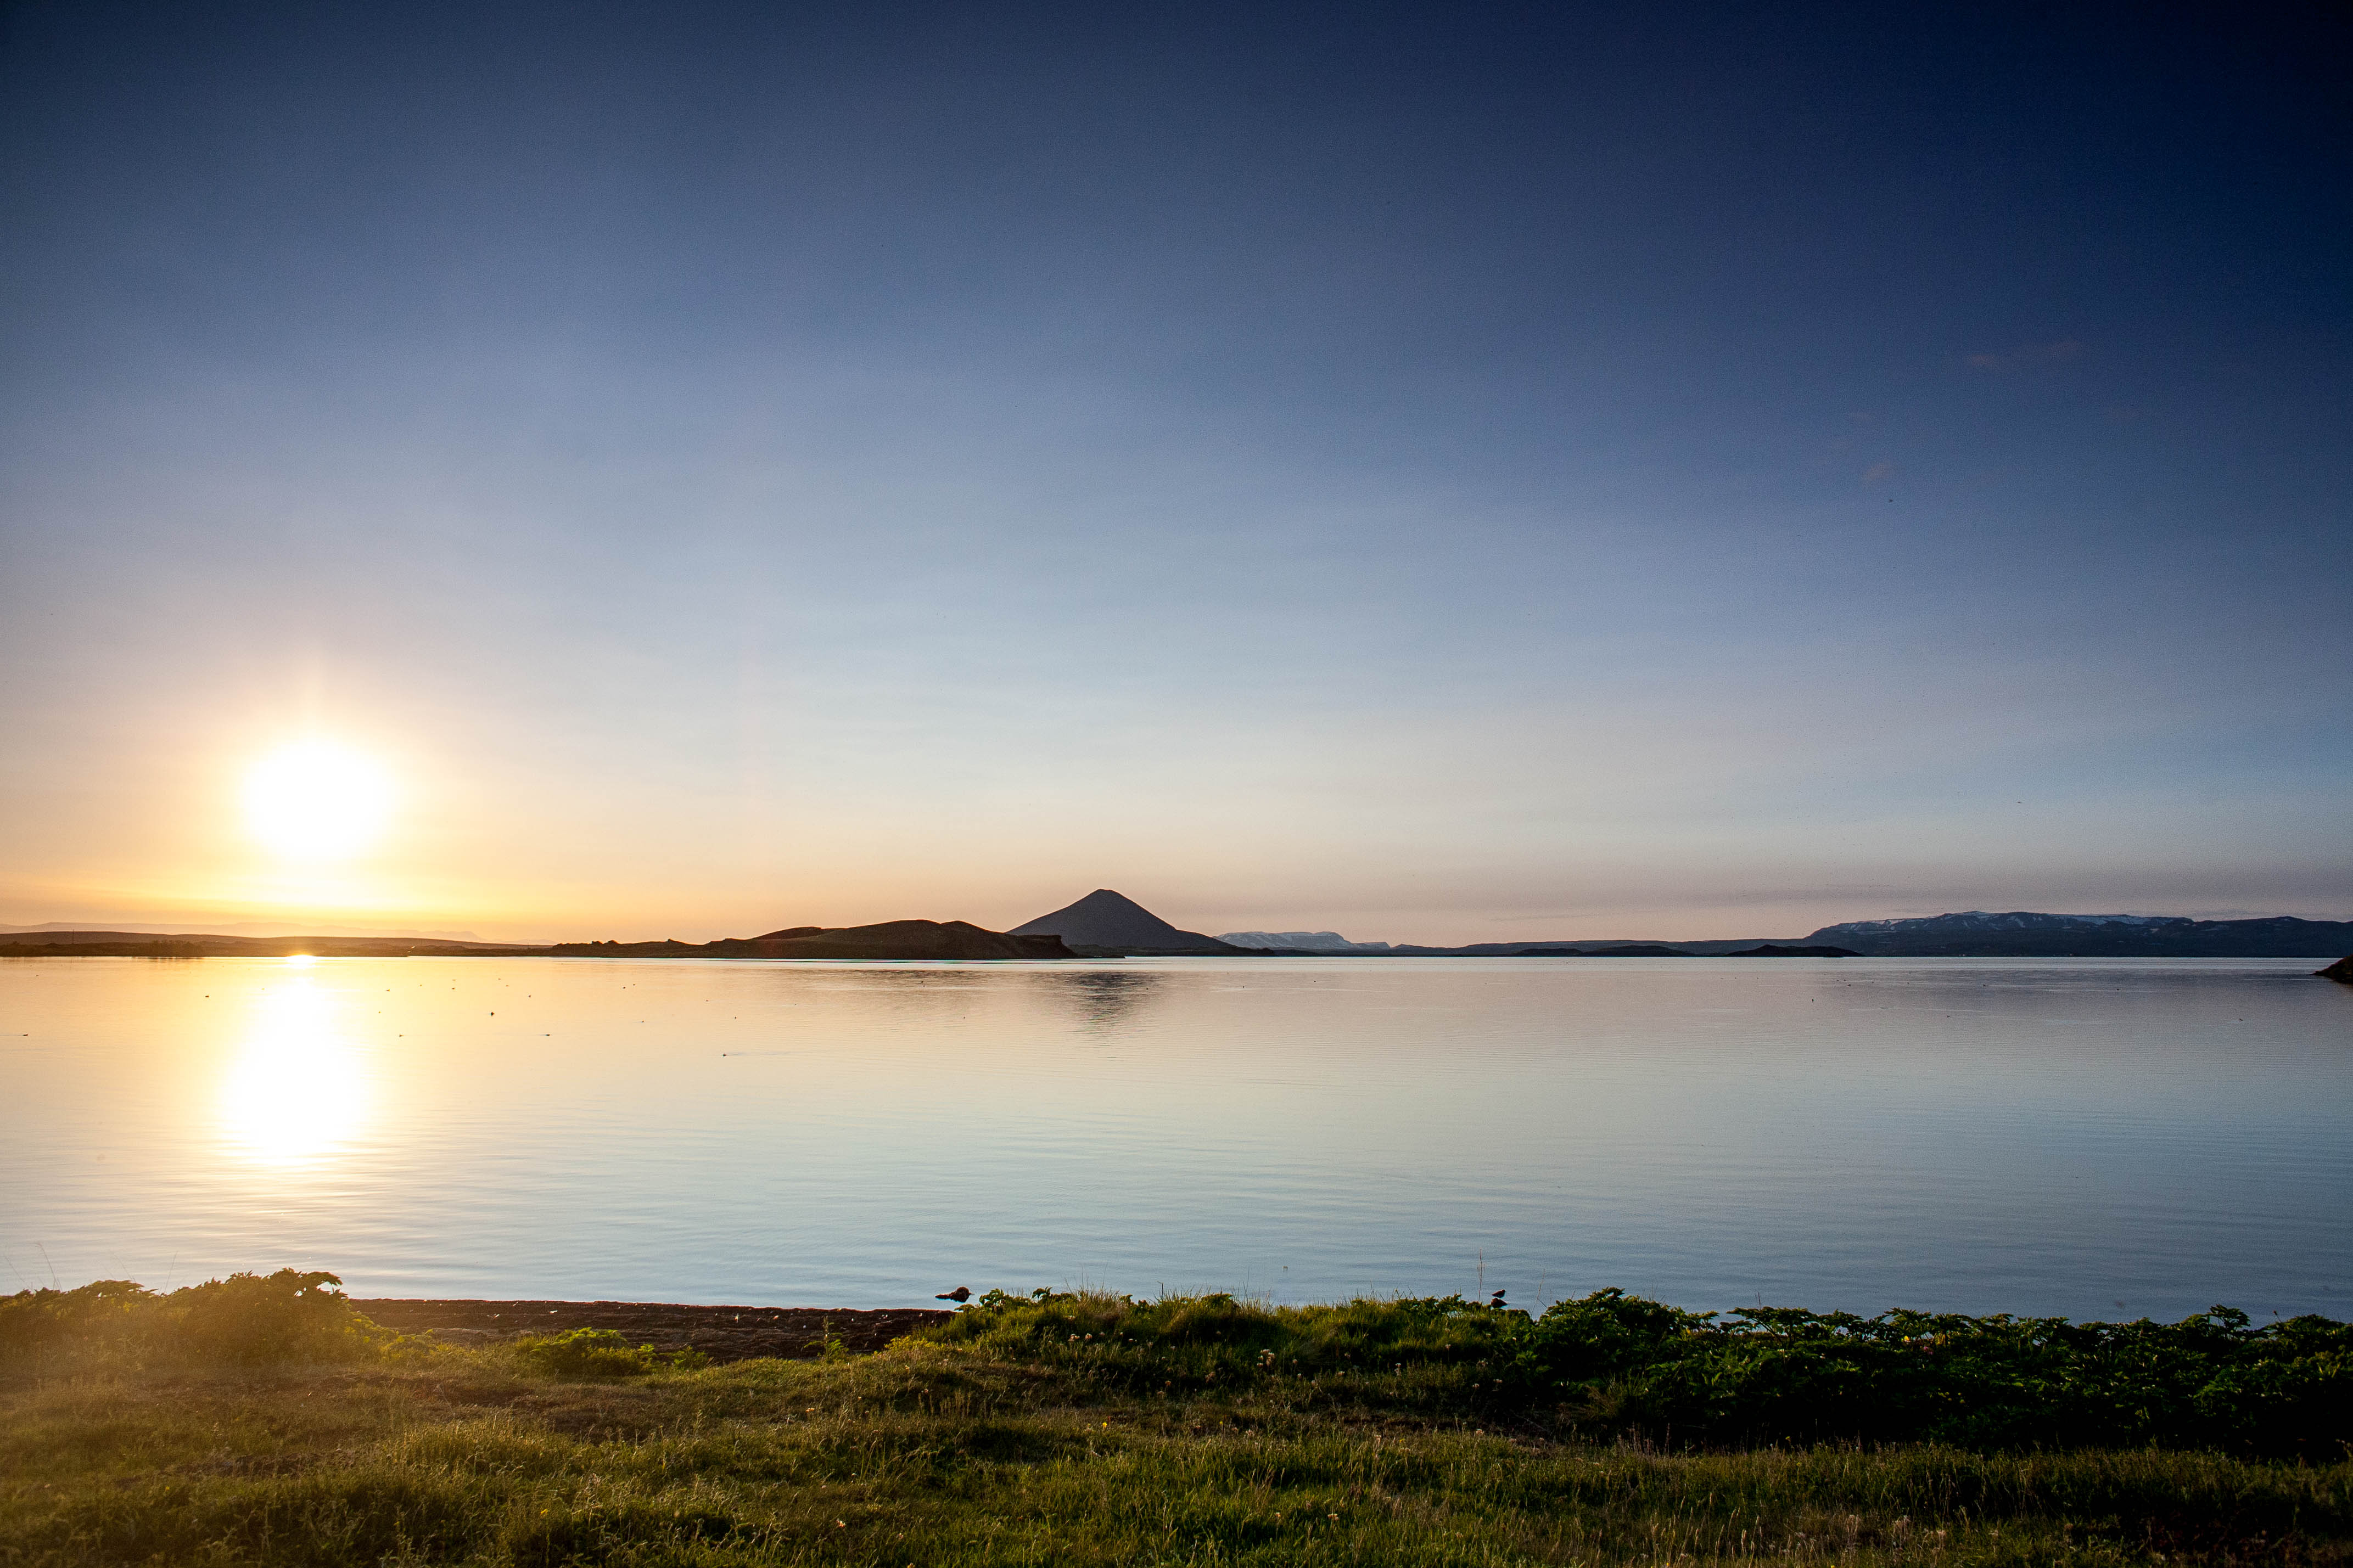 Lake Mývatn is known for its rich flora and fauna, and breathtaking to look at on calm summer days.